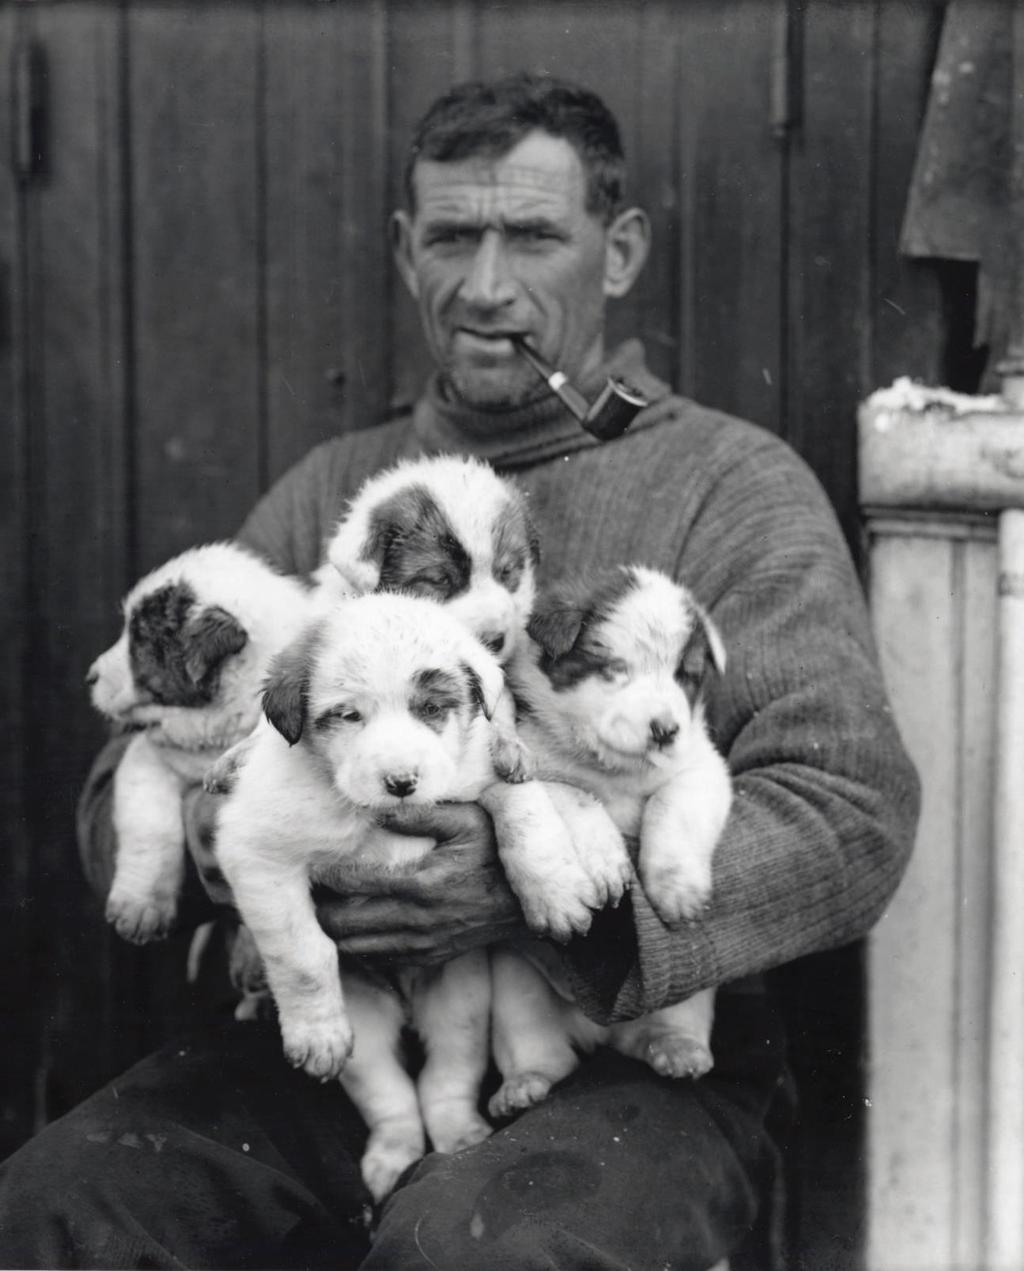 The dogs had been brought from England on the Endurance, some pups were born on the journey